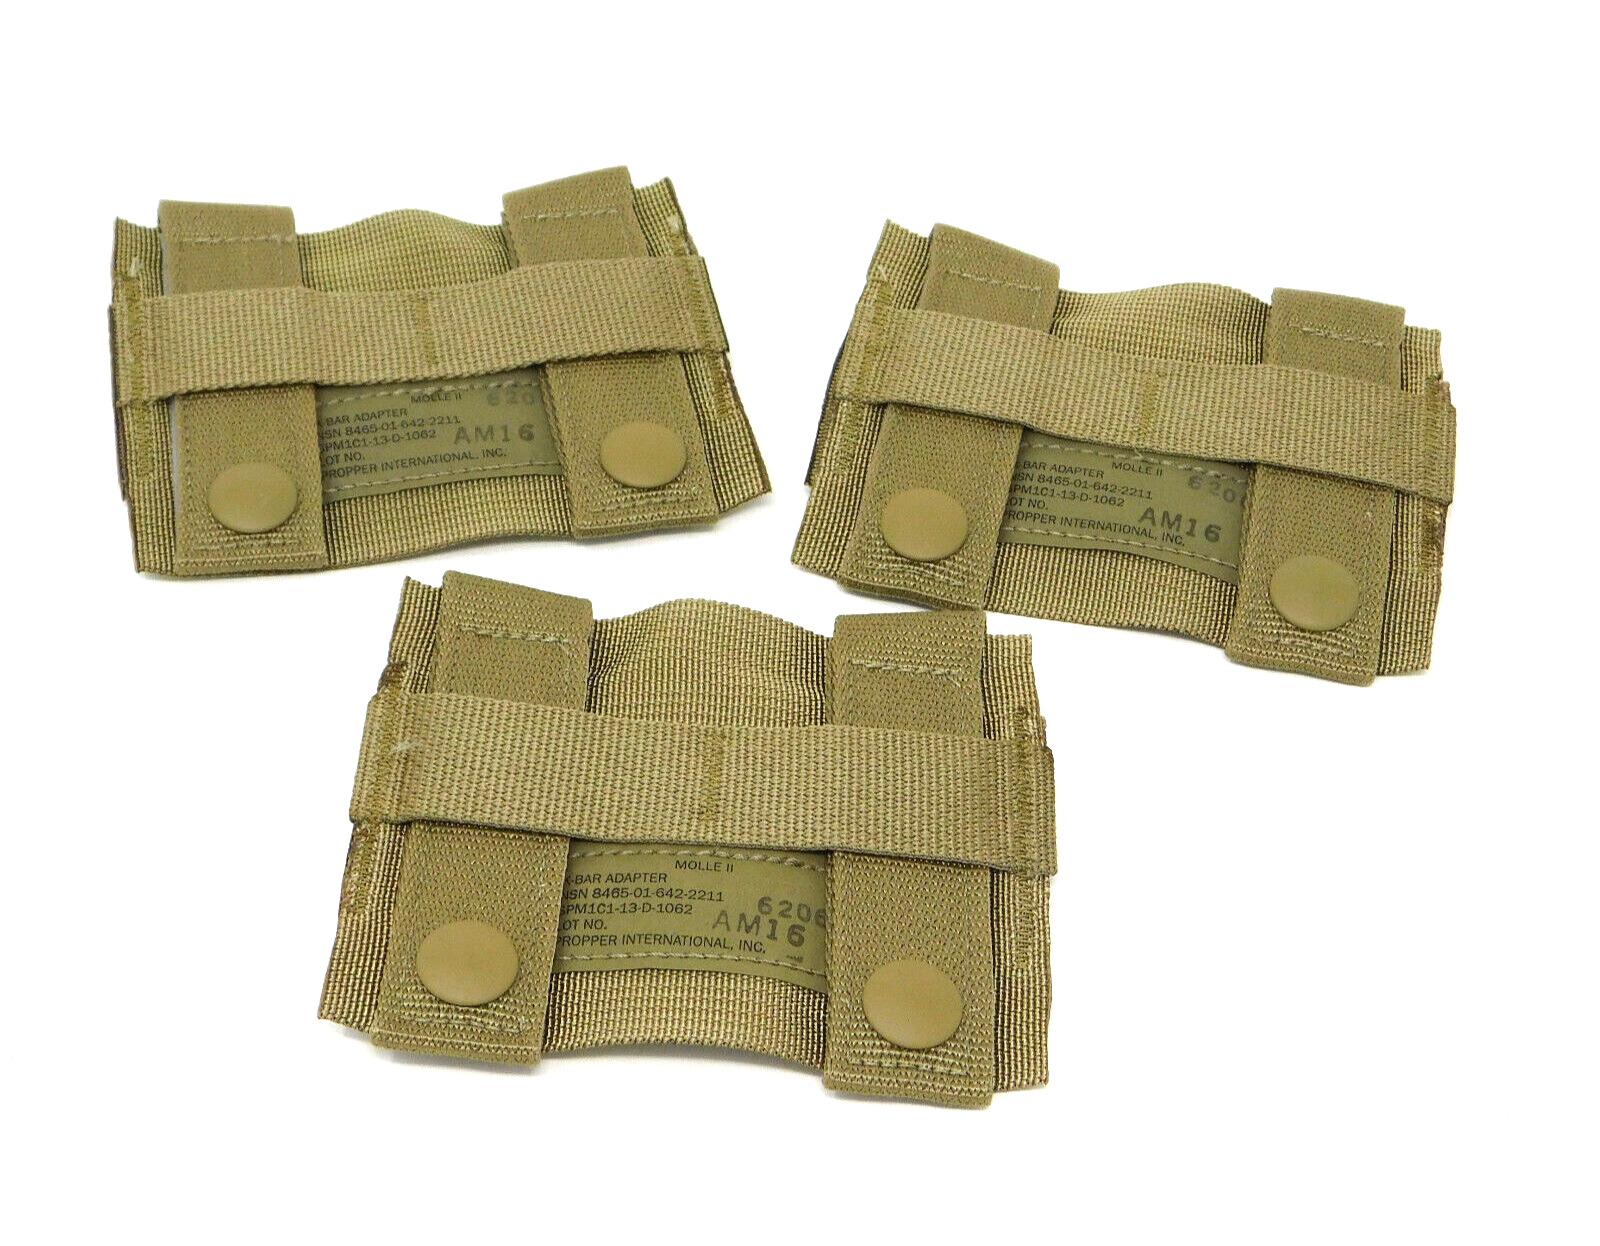 3-PACK - US Military K-BAR ADAPTERS - COYOTE -  New in Bag